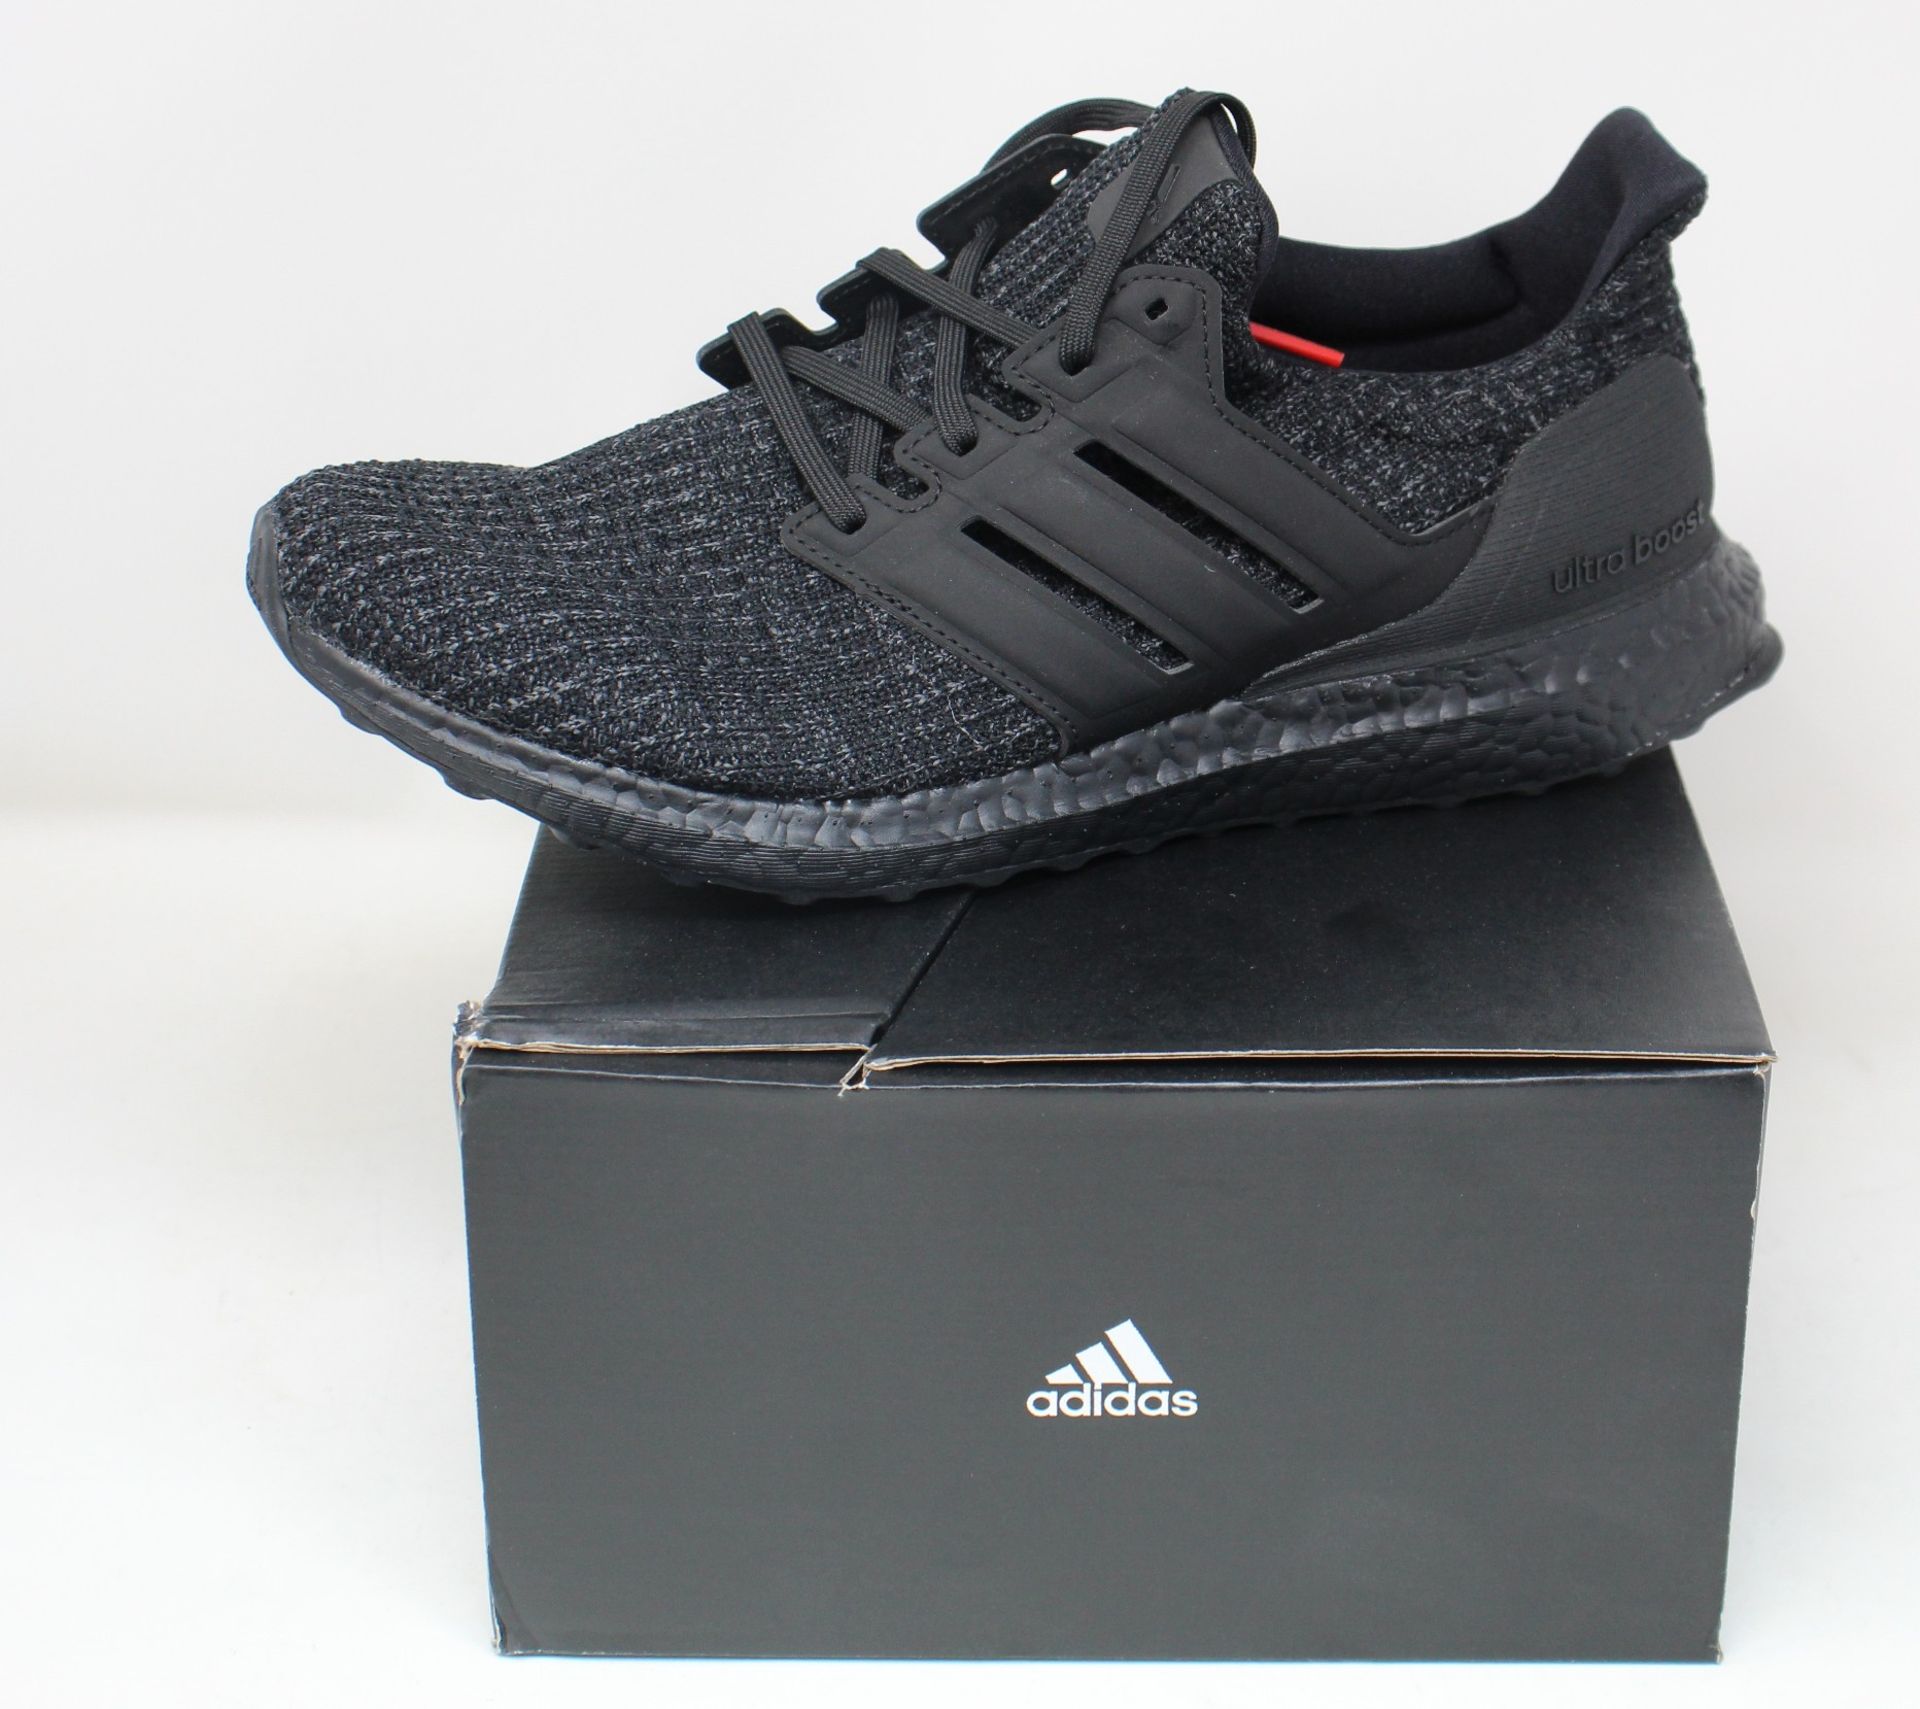 A pair of as new Adidas Ultra Boost trainers (UK 7).